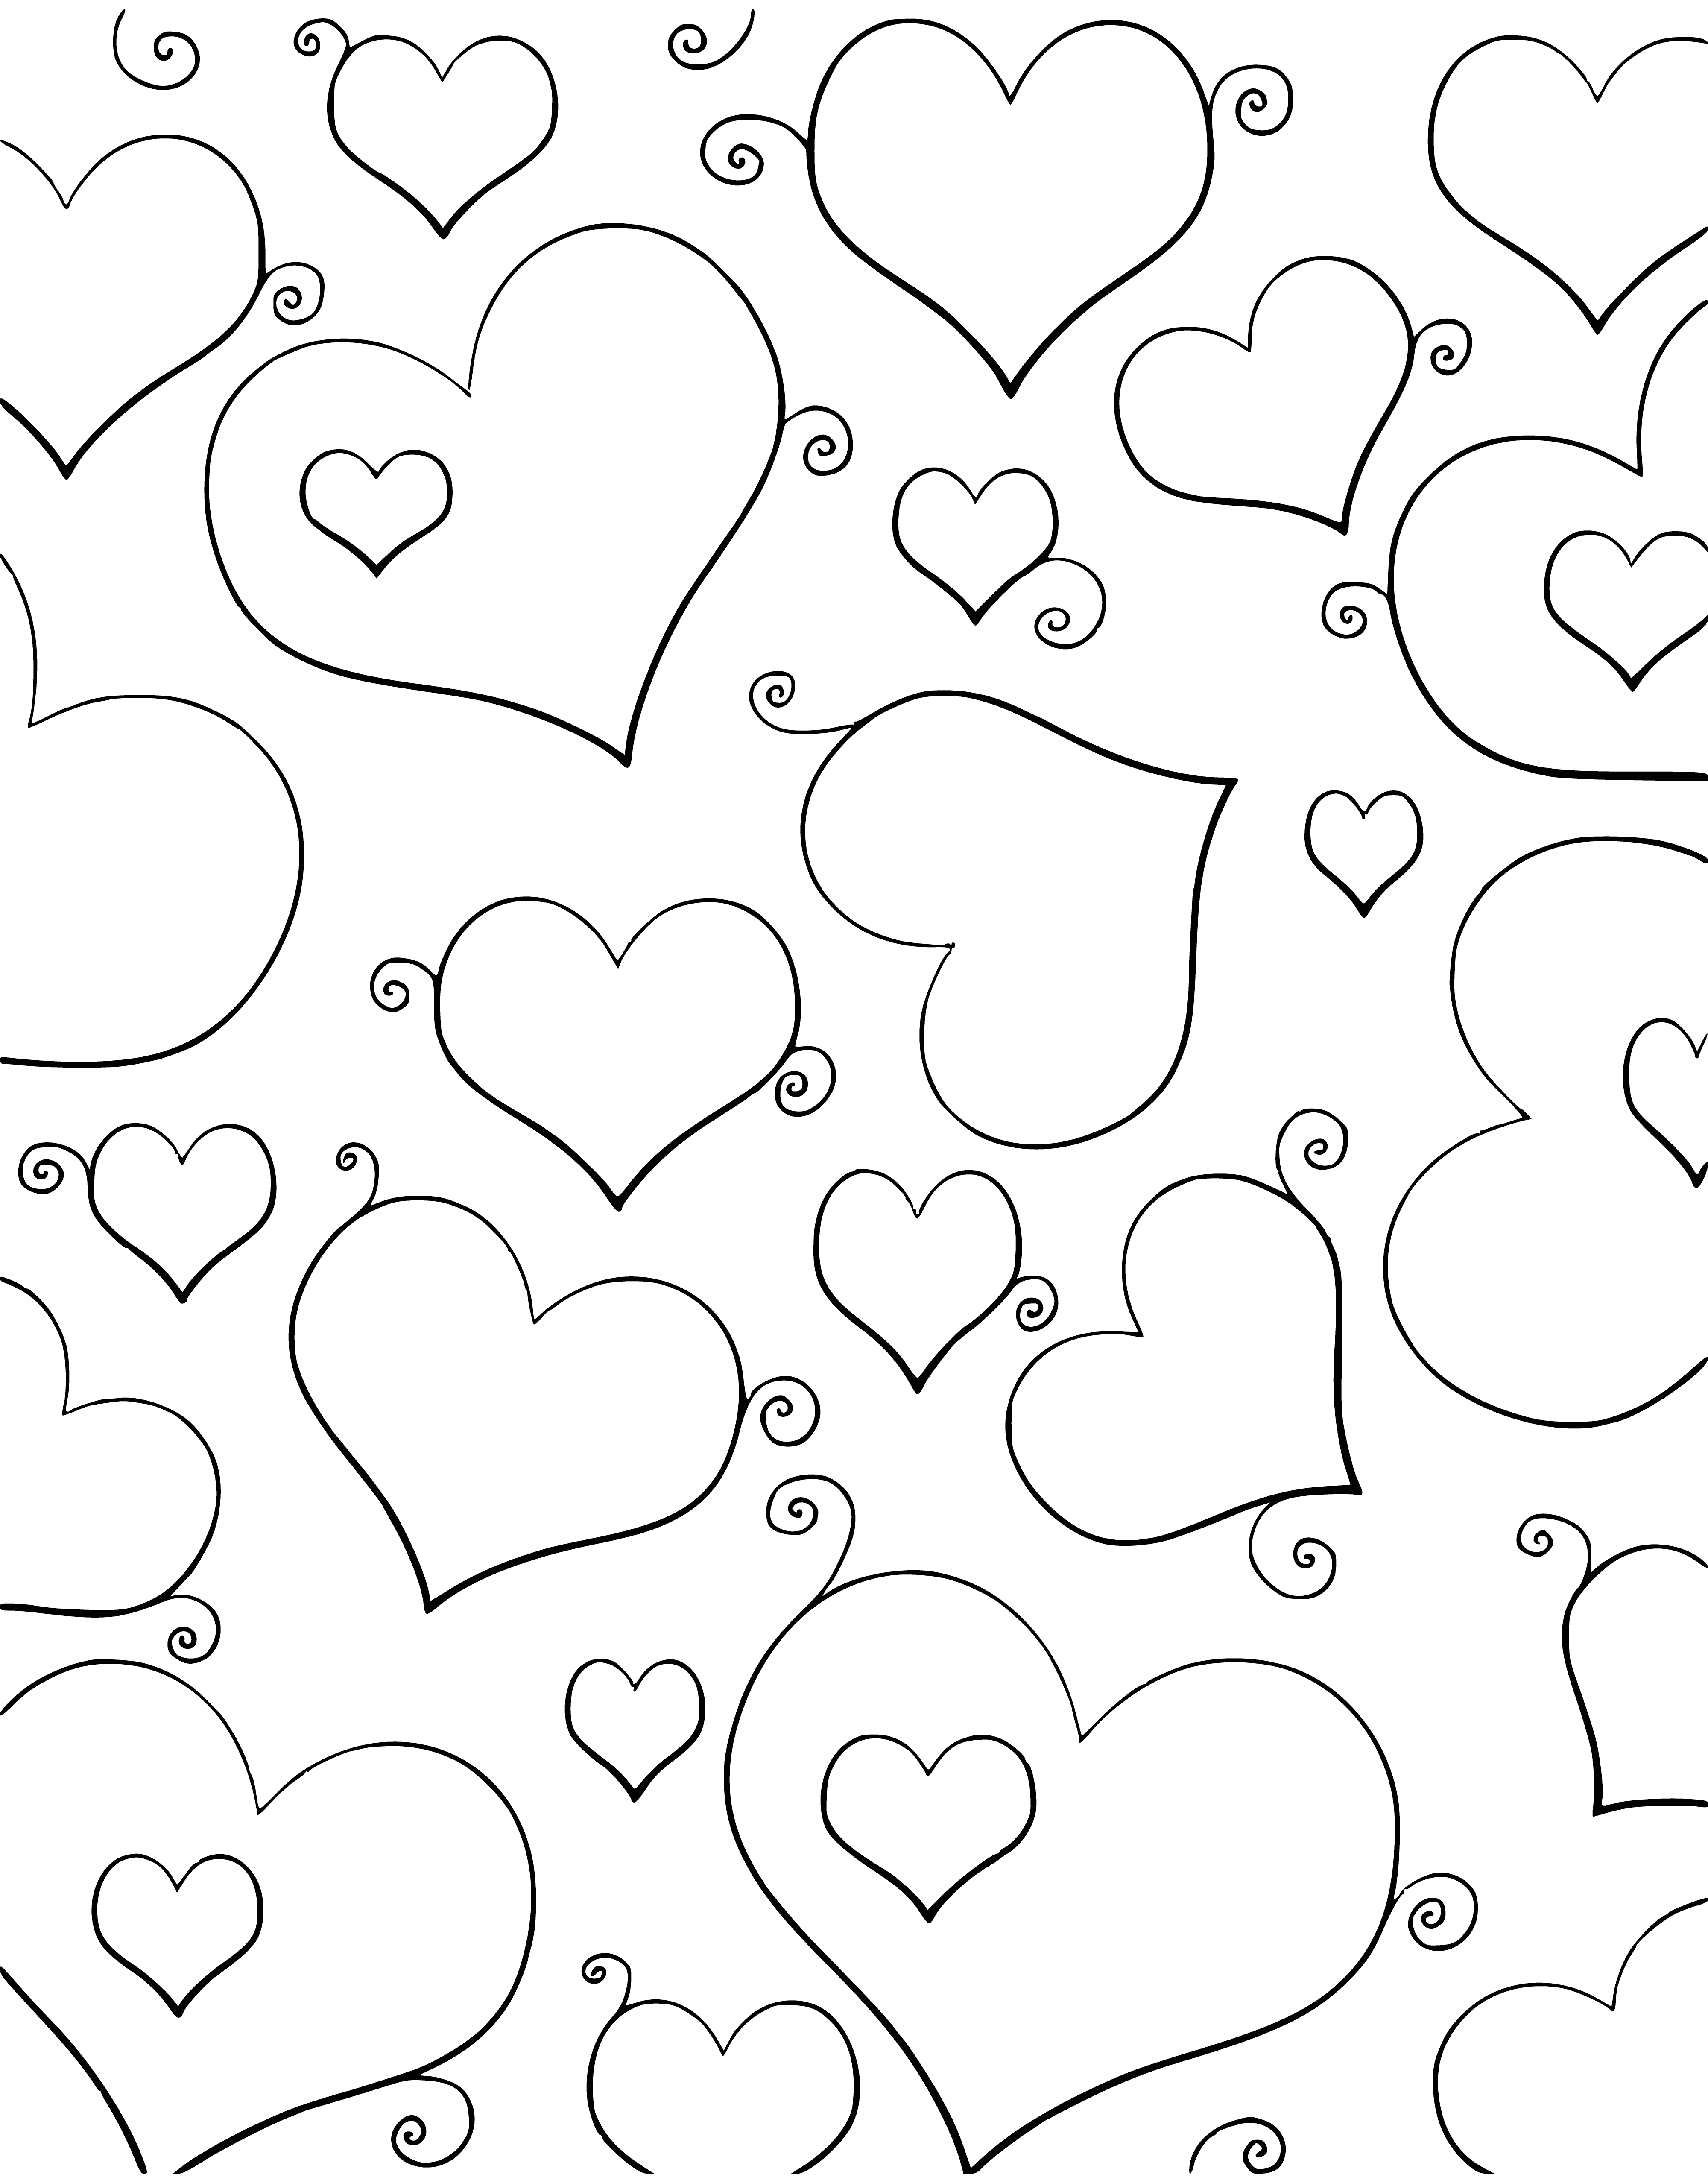 coloring page: Two hearts, red and pink, floating with many others in the air. Colors including red, pink and white.